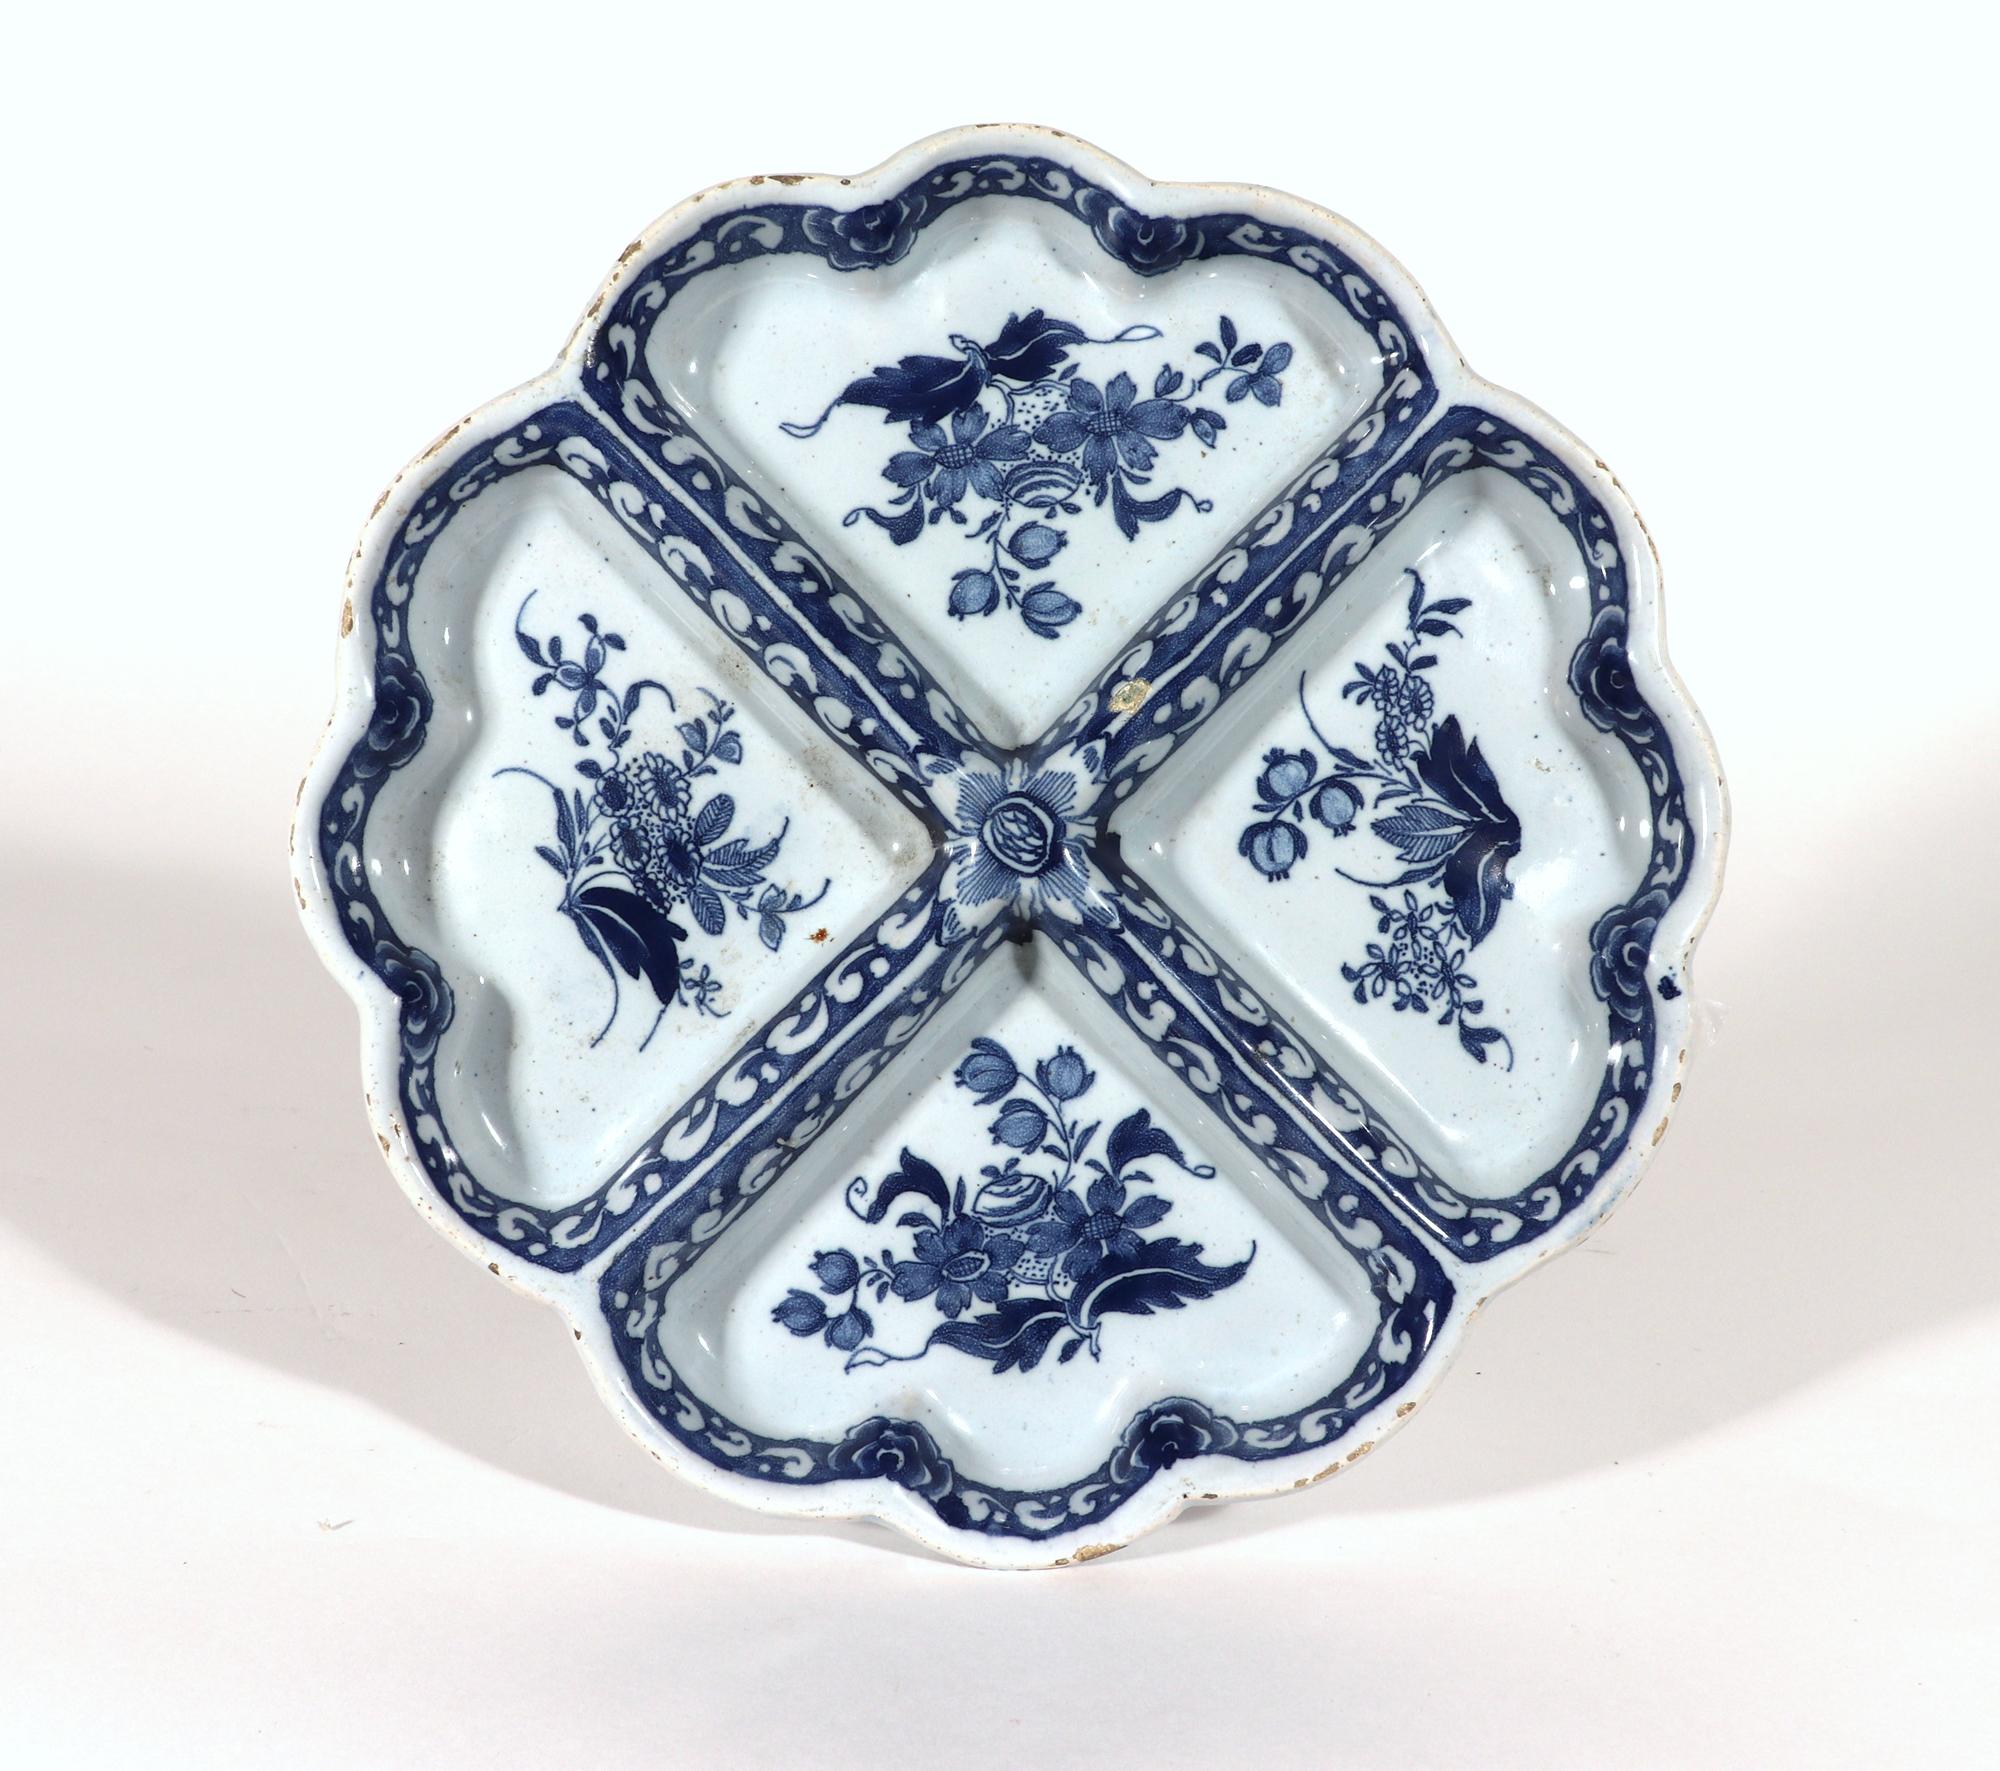 English Delftware blue & white sweetmeat dish,
London,
Possibly Lambeth High Street, William Griffith's pottery.
Circa 1750-60

The rare underglaze blue & white sweetmeat dish is divided into four sections with two different patterns of leaves